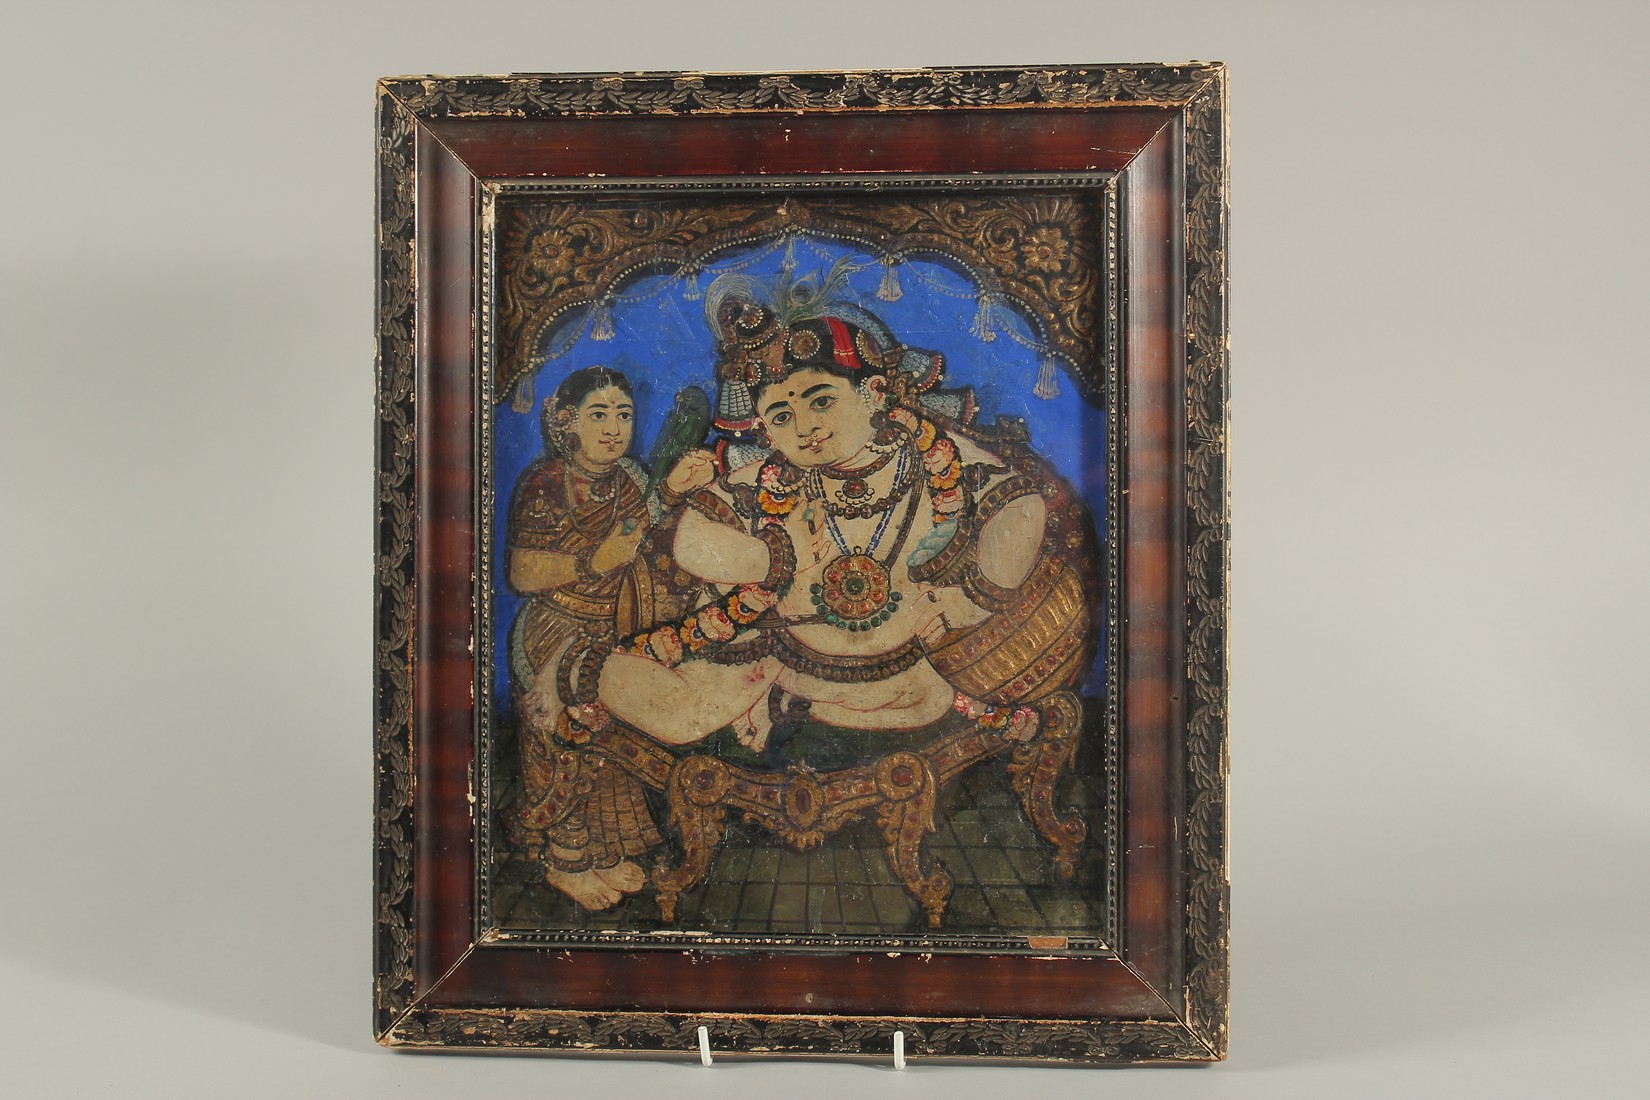 A FINE 19TH CENTURY SOUTH INDIAN TANJORE PAINTING OF ENTHRONED BABY KRISHNA, 39cm x 34cm overall.